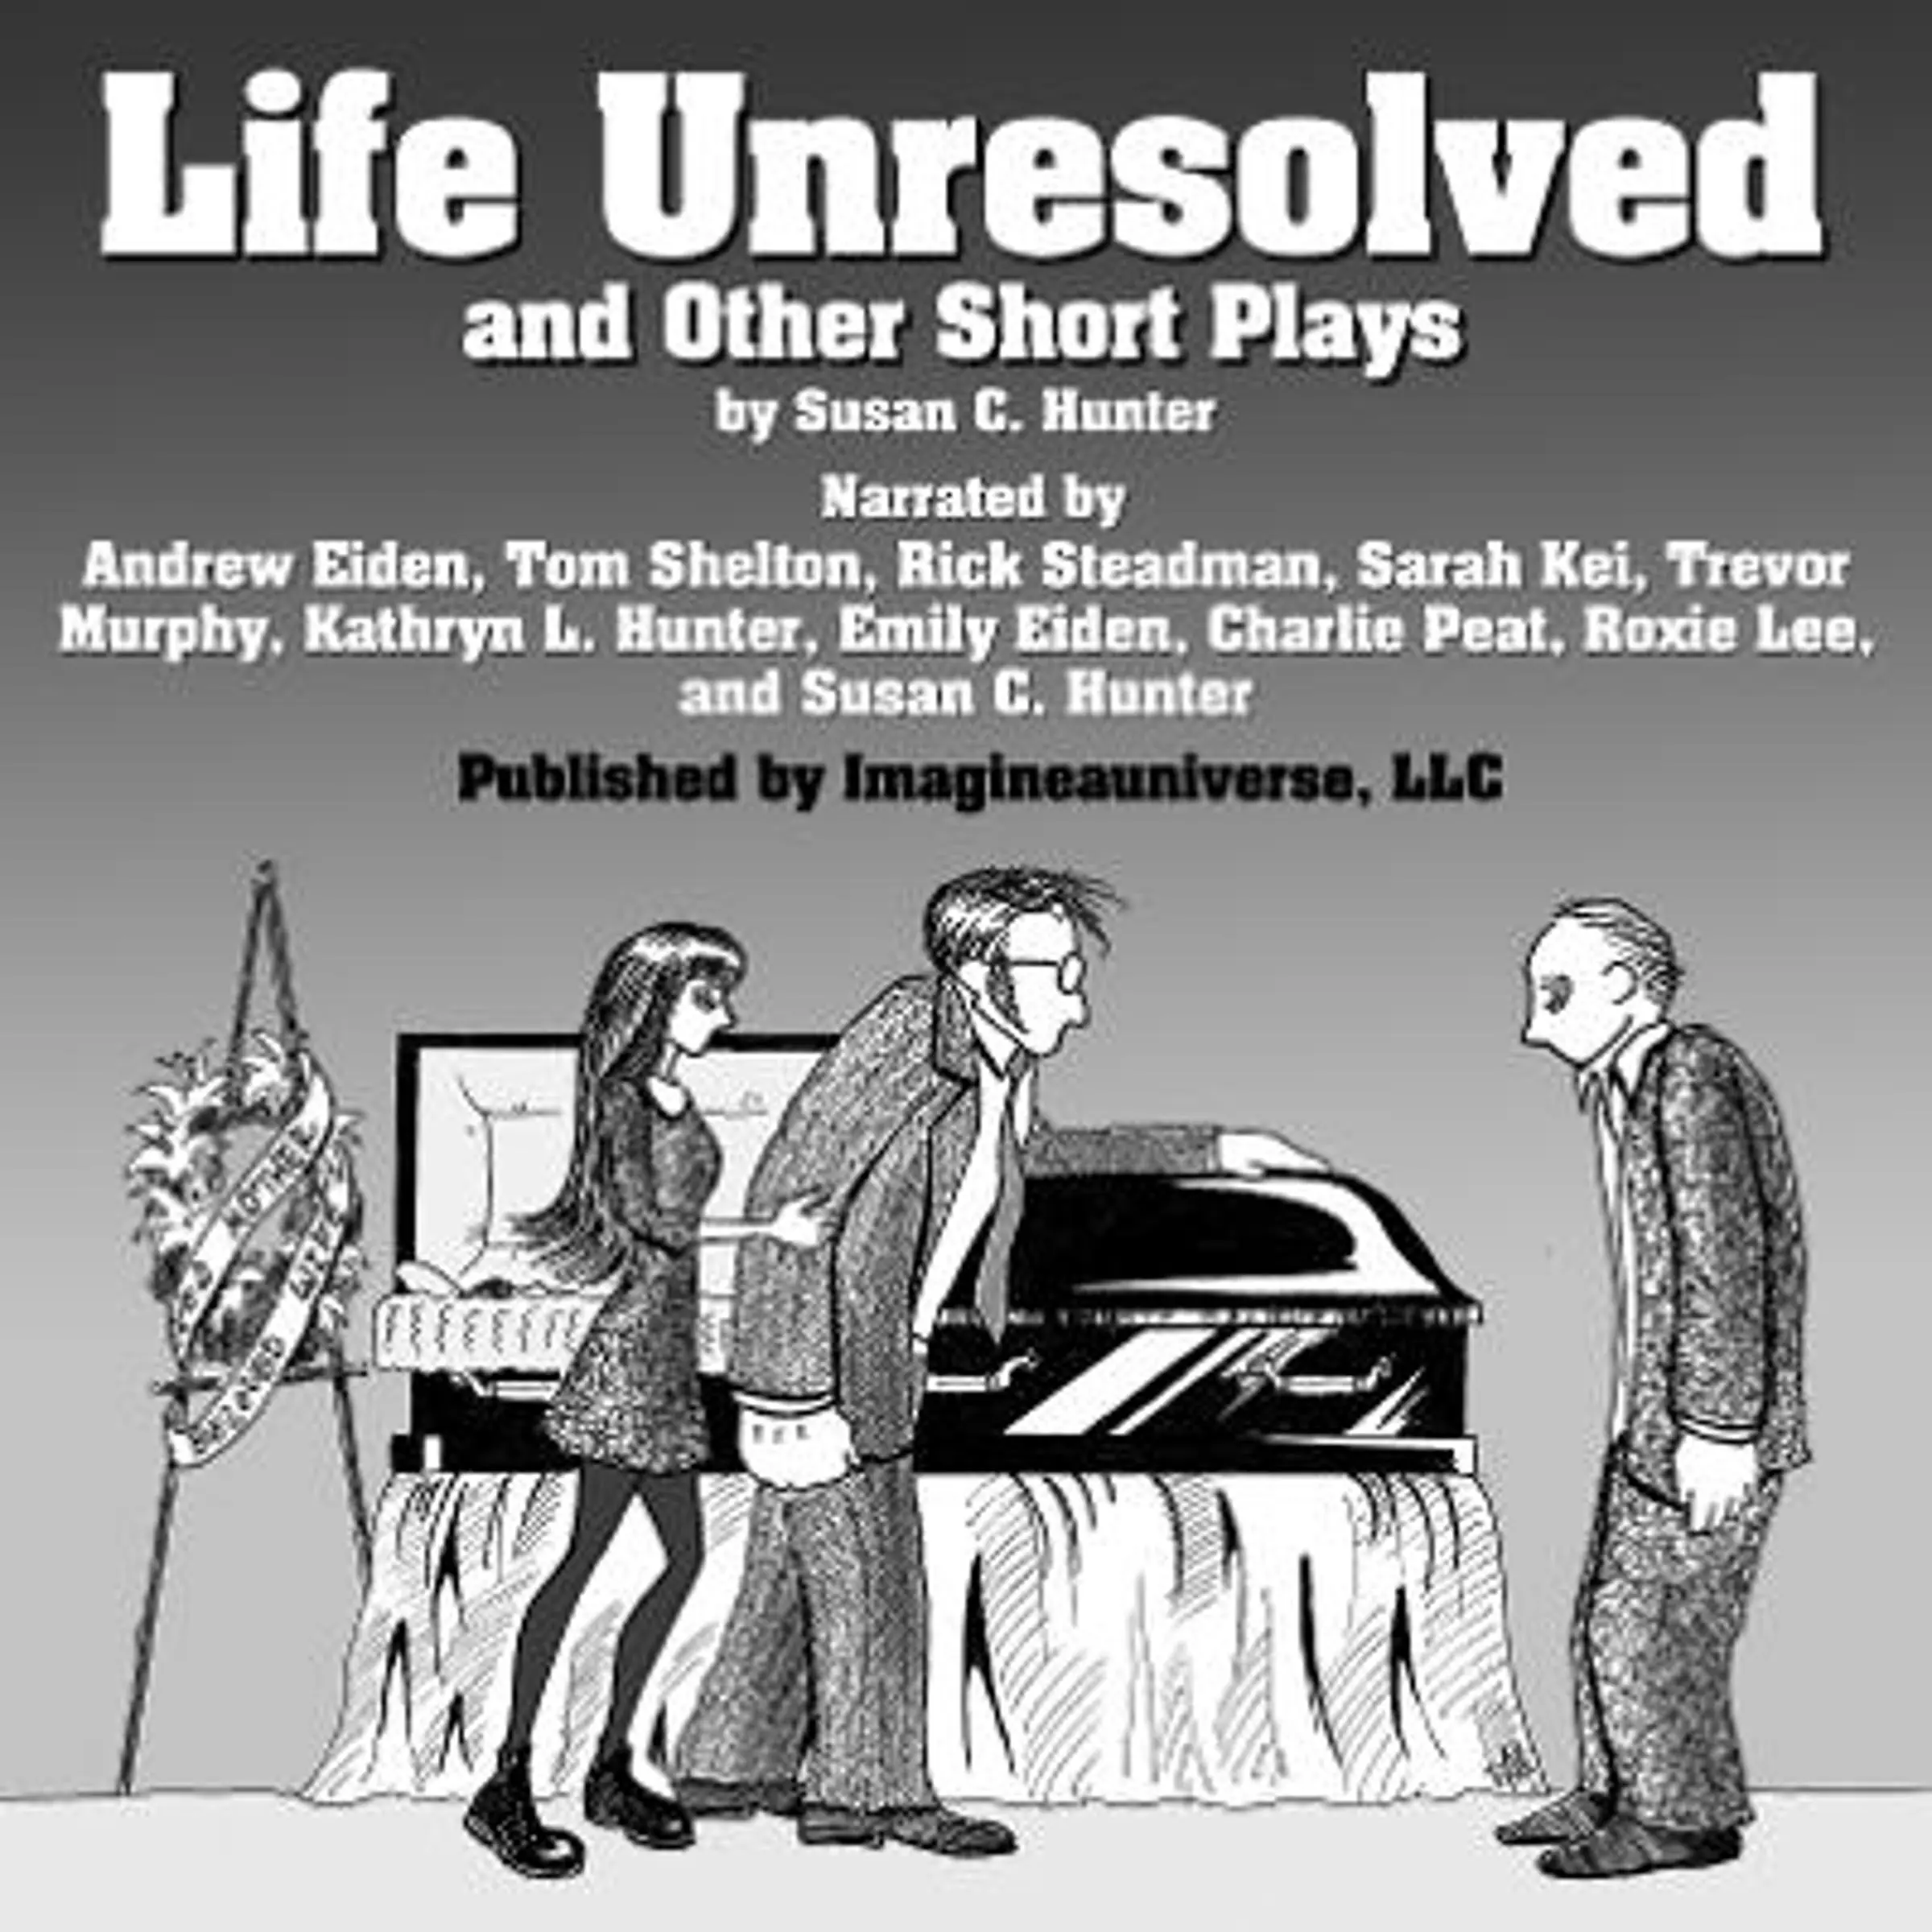 Life Unresolved and Other Short Plays by Susan C. Hunter Audiobook